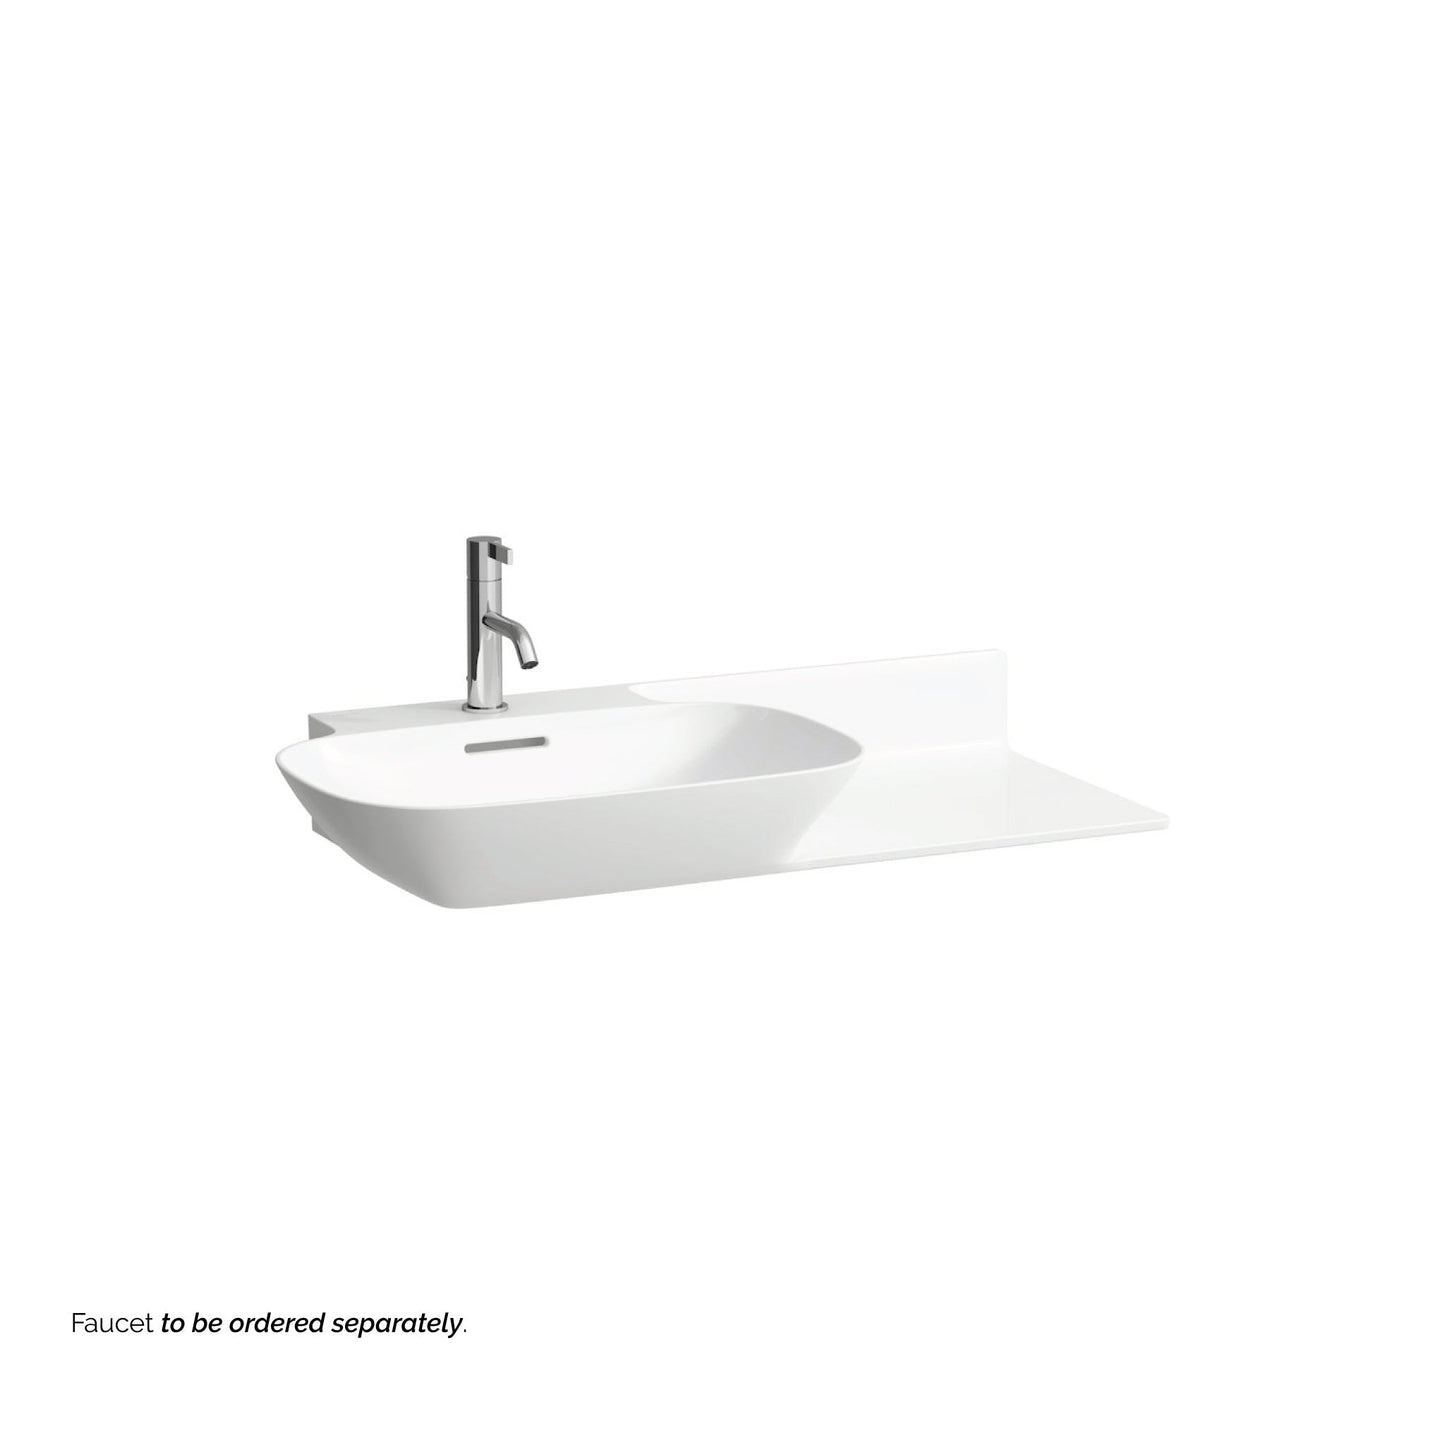 Laufen Ino 35" x 18" Matte White Wall-Mounted Shelf-Right Bathroom Sink With Faucet Hole